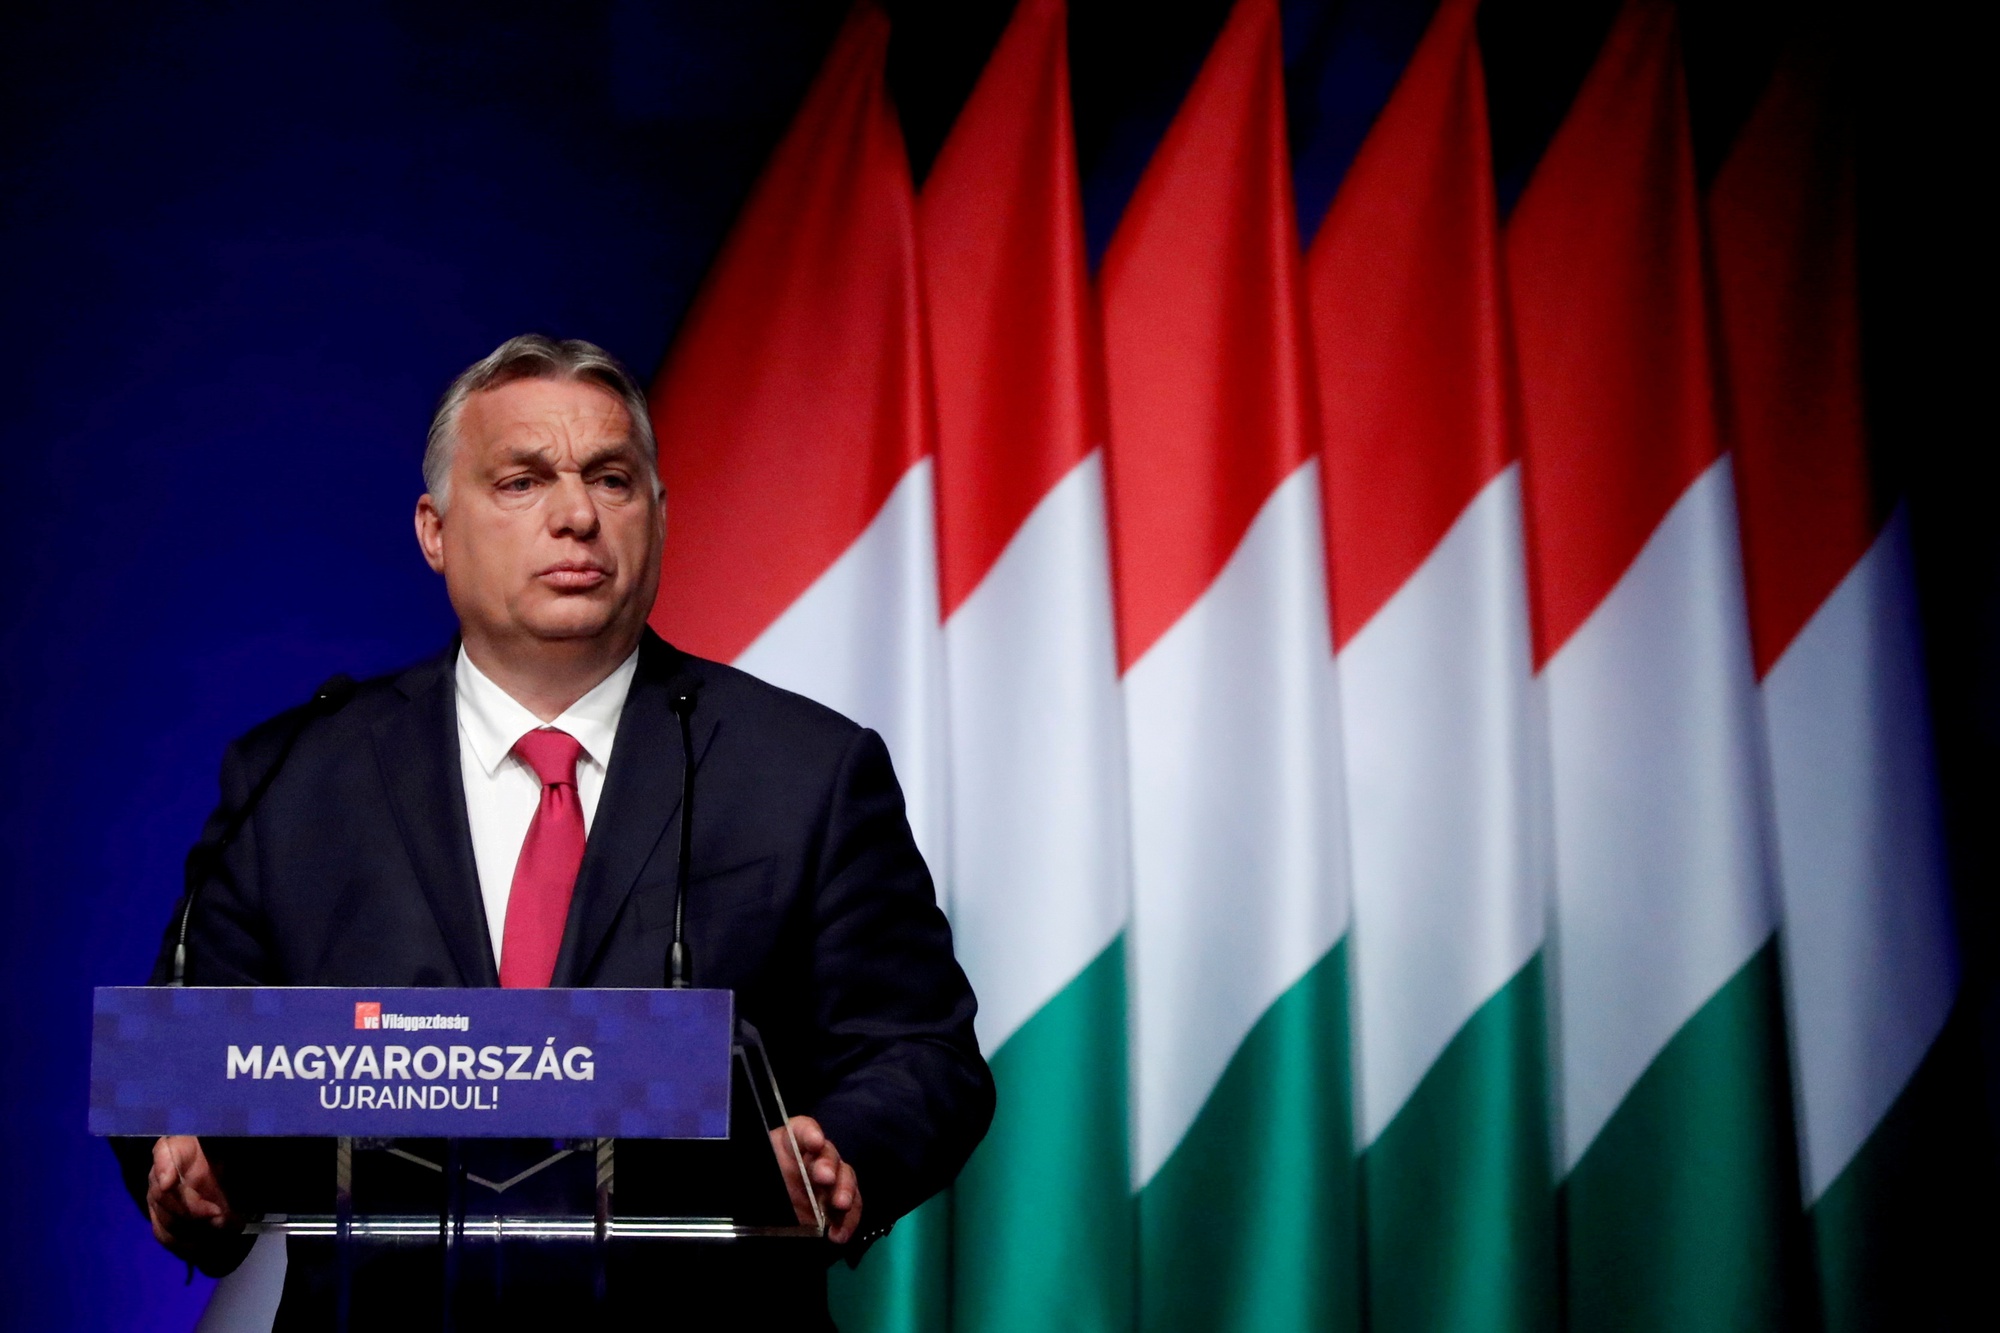 Concerned about the Russia-Ukraine conflict, Hungary imposes a 